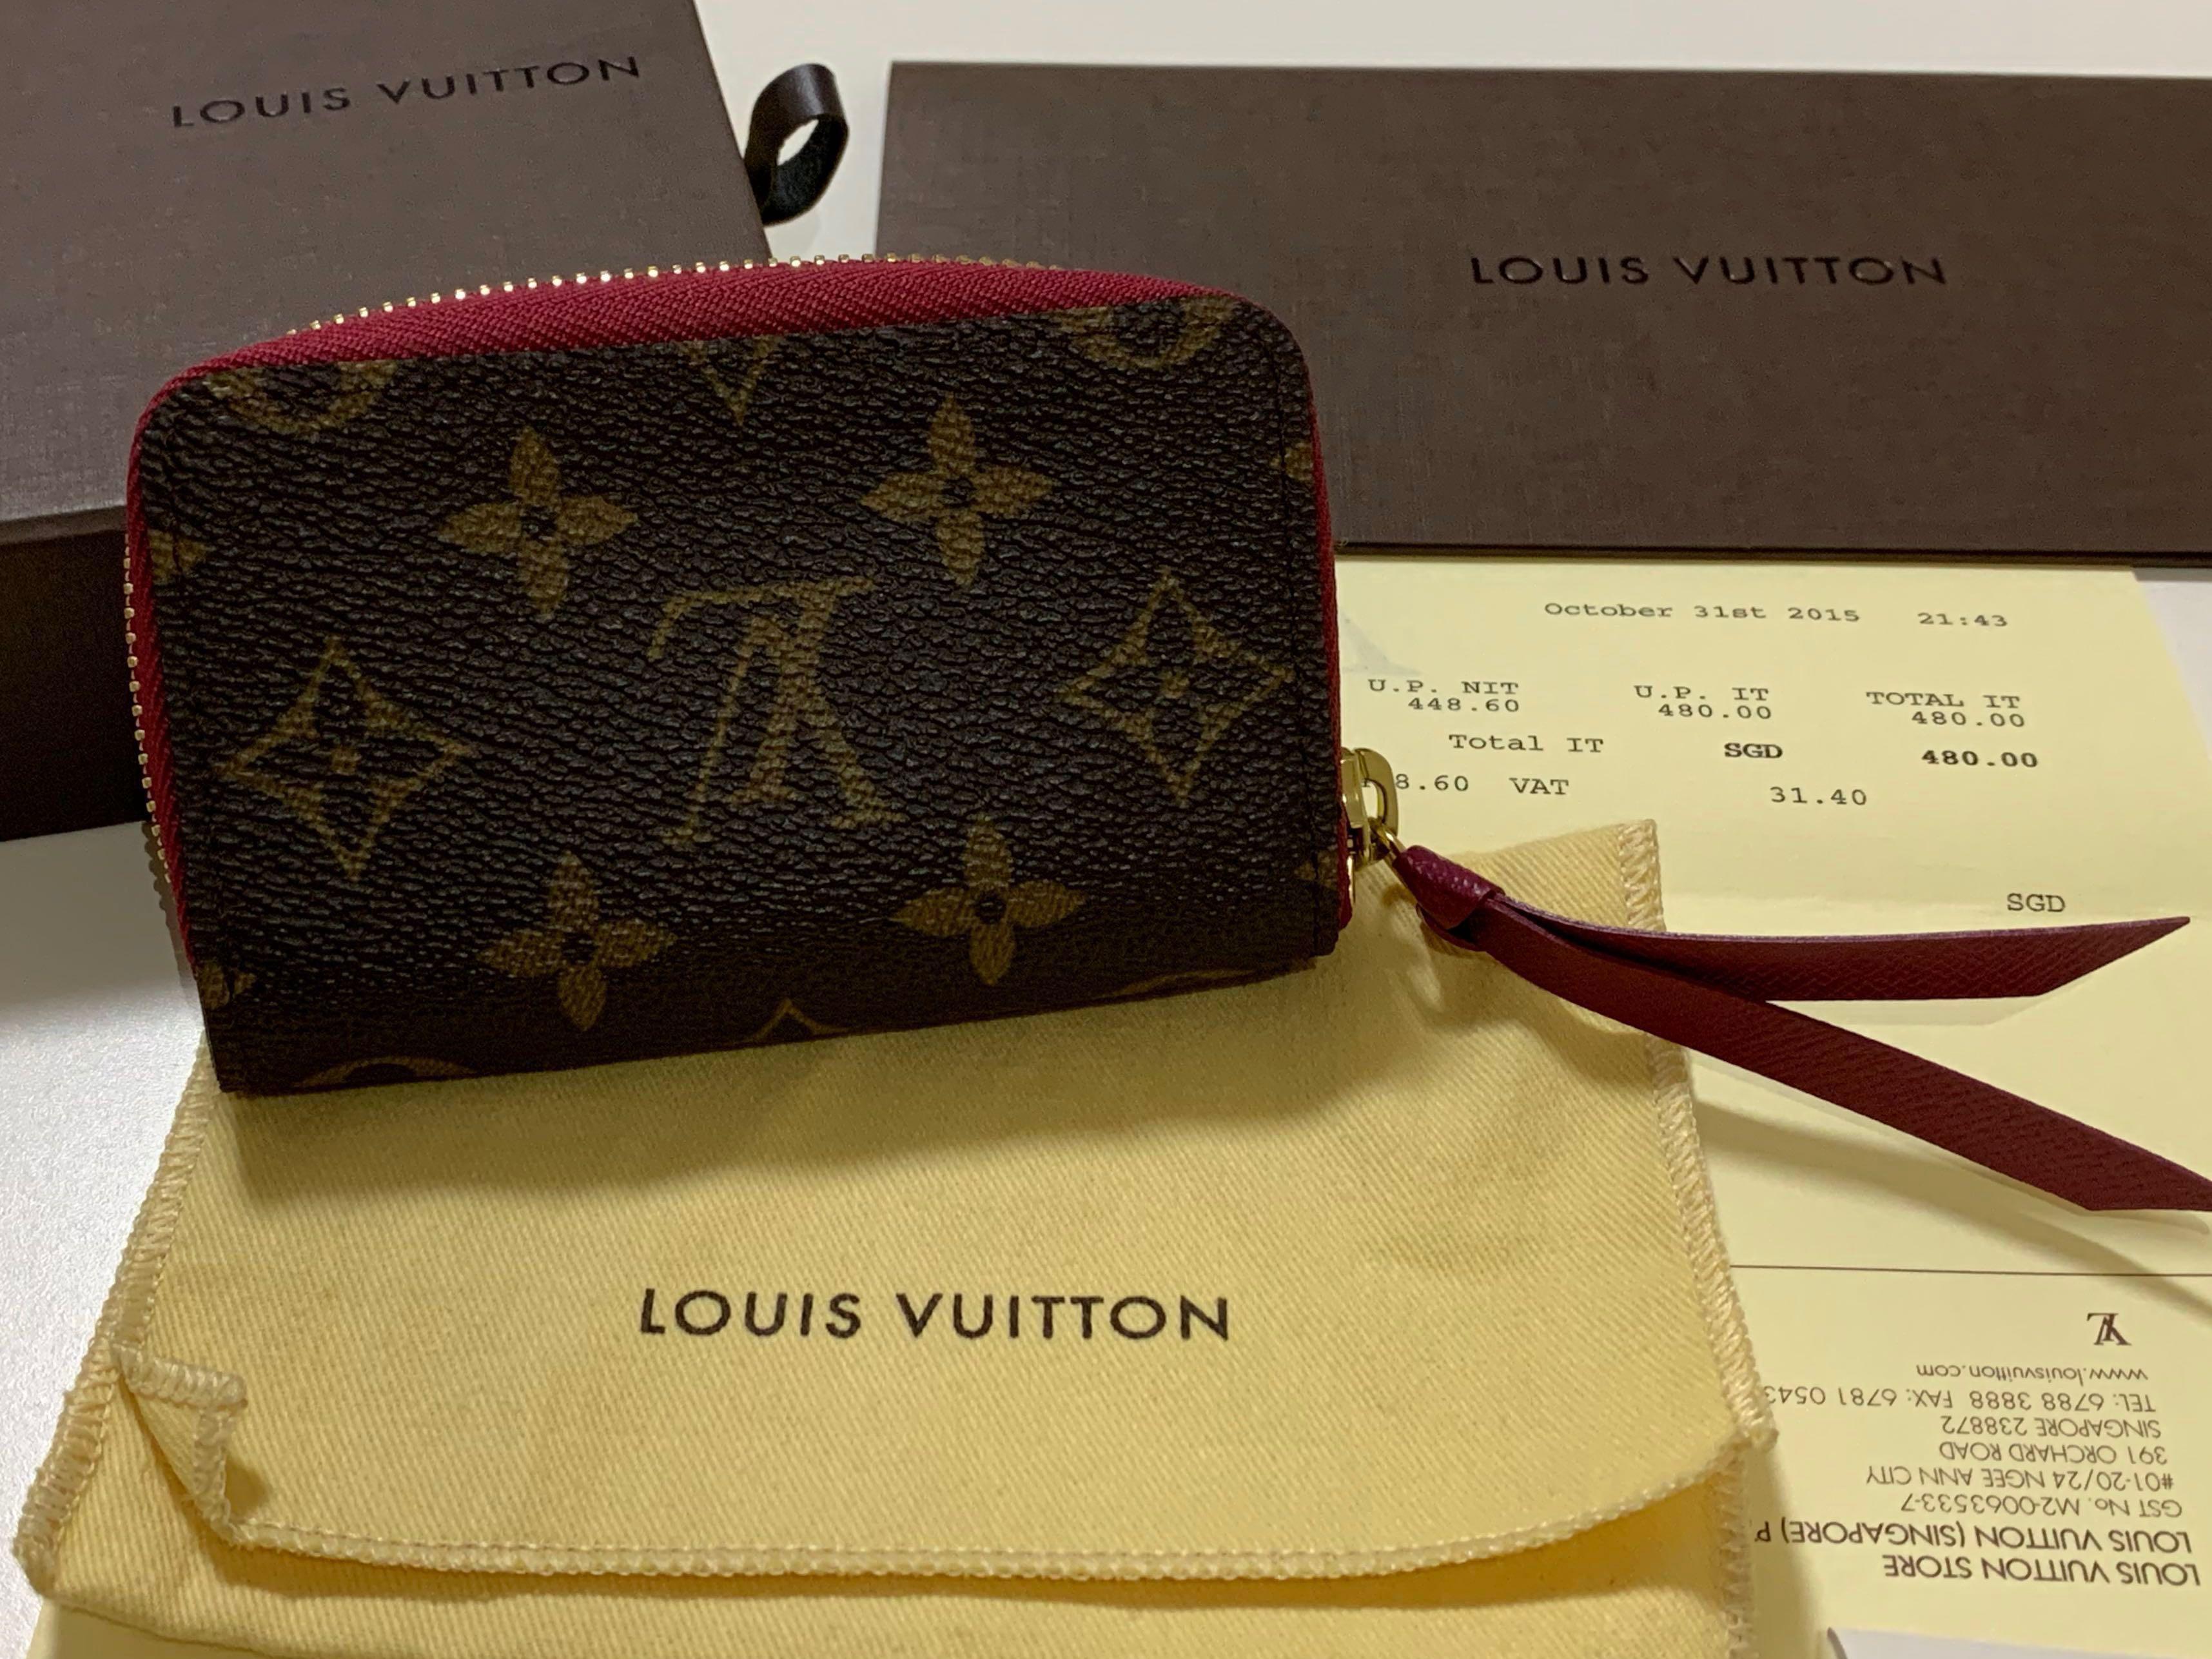 LOUIS VUITTON - 391, Orchard Rd, Singapore, Singapore - Leather Goods -  Phone Number - Yelp